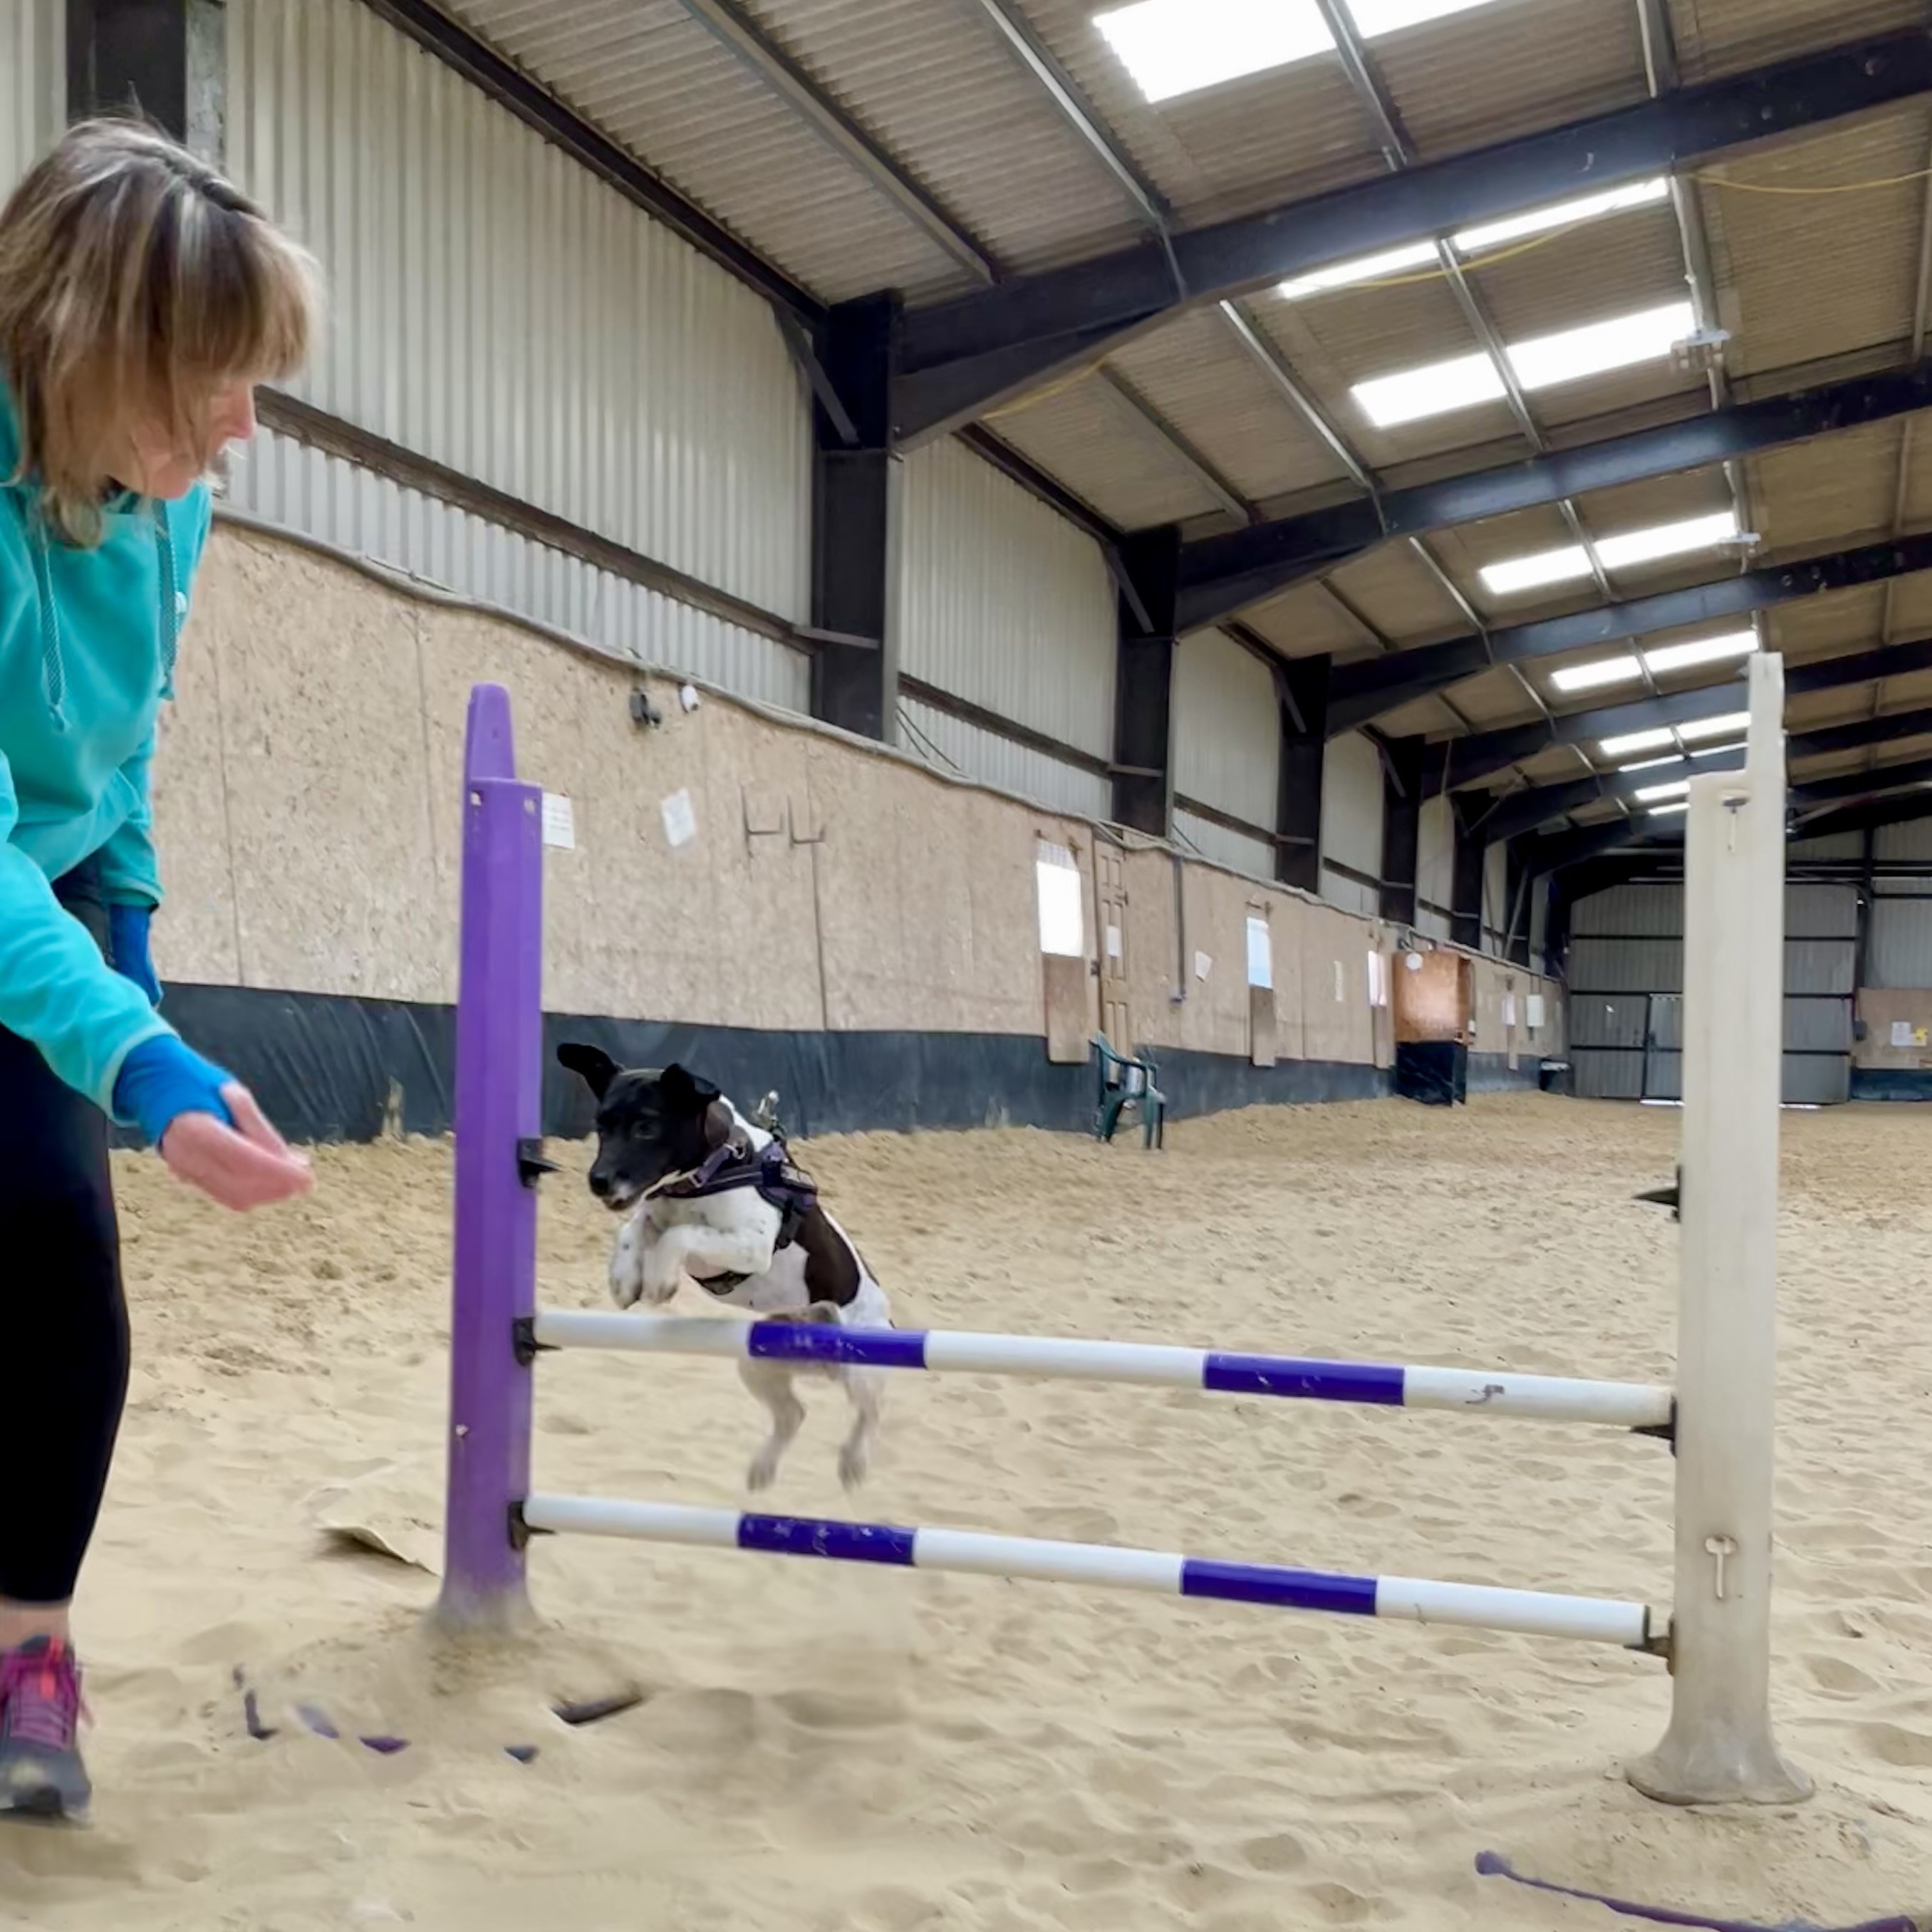 A small terrier jumping over a two bar gate. Her belly and front legs have cleared the bar and her back legs will soon follow. This is taking place in a large barn with sand on the ground.